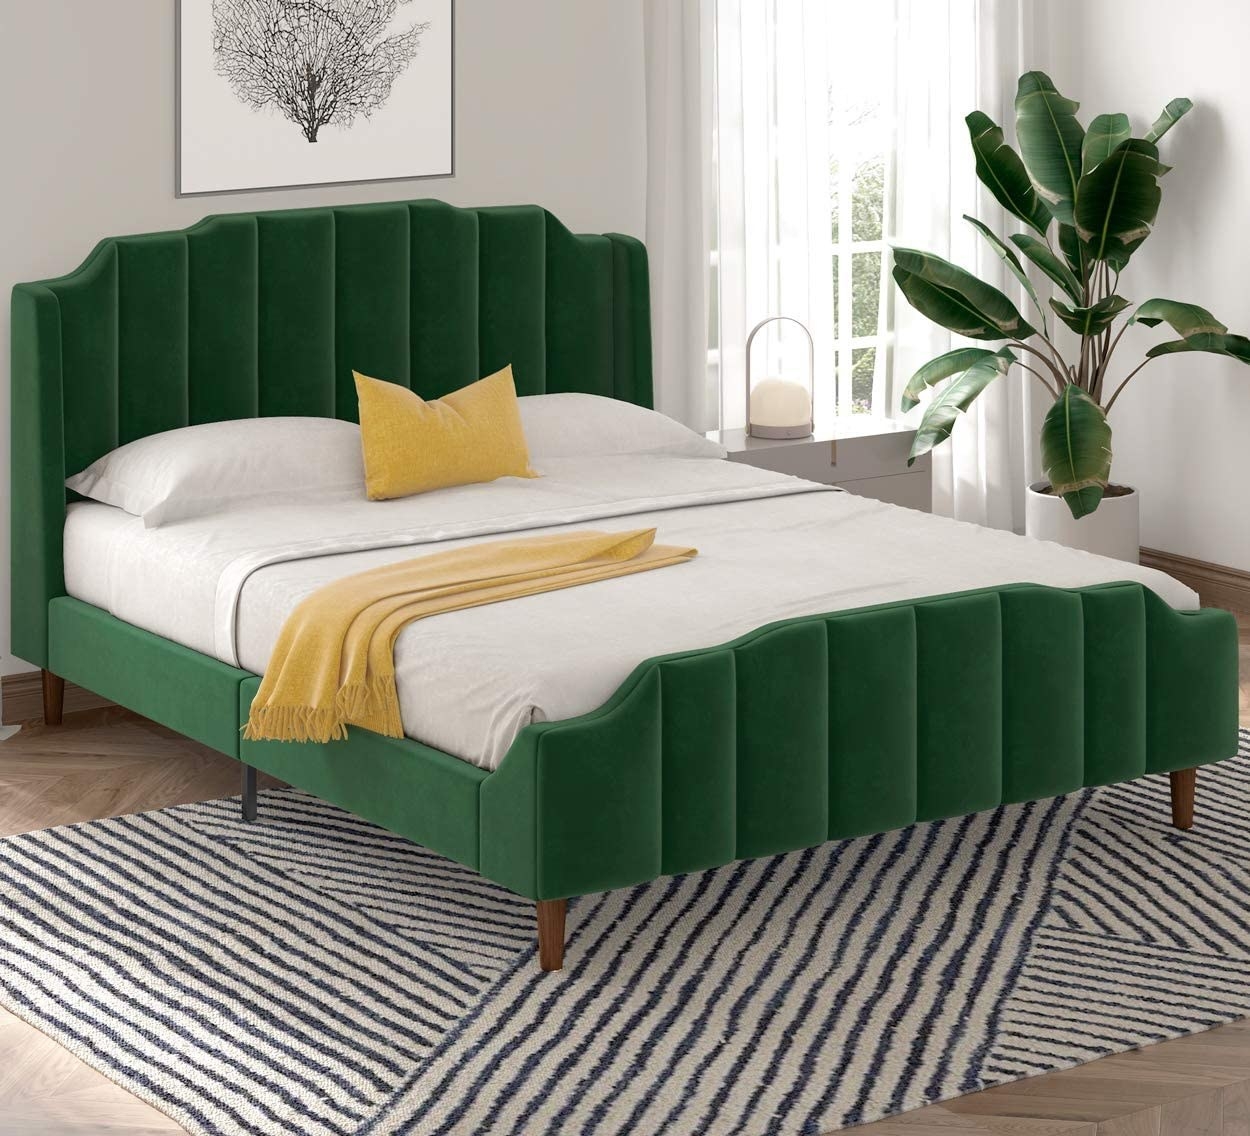 27 Bed Frames That Only Look, Bed Frame For Just Mattress